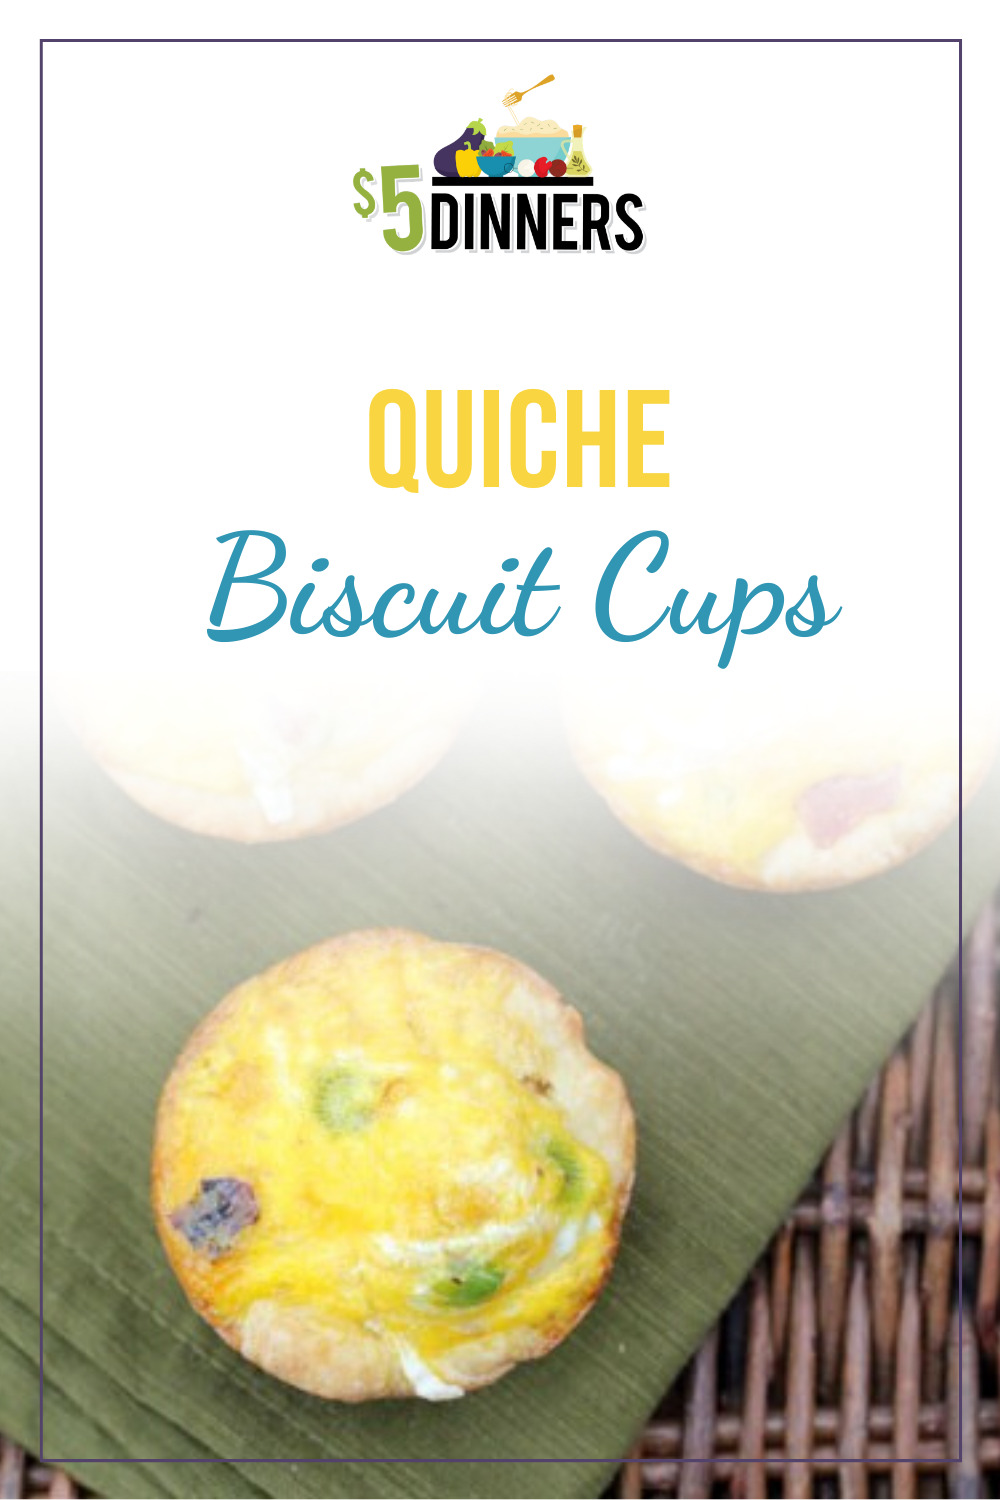 5 Minute Mini Quiches in a Cake Pop Maker - This Is Cooking for Busy  MumsThis Is Cooking for Busy Mums